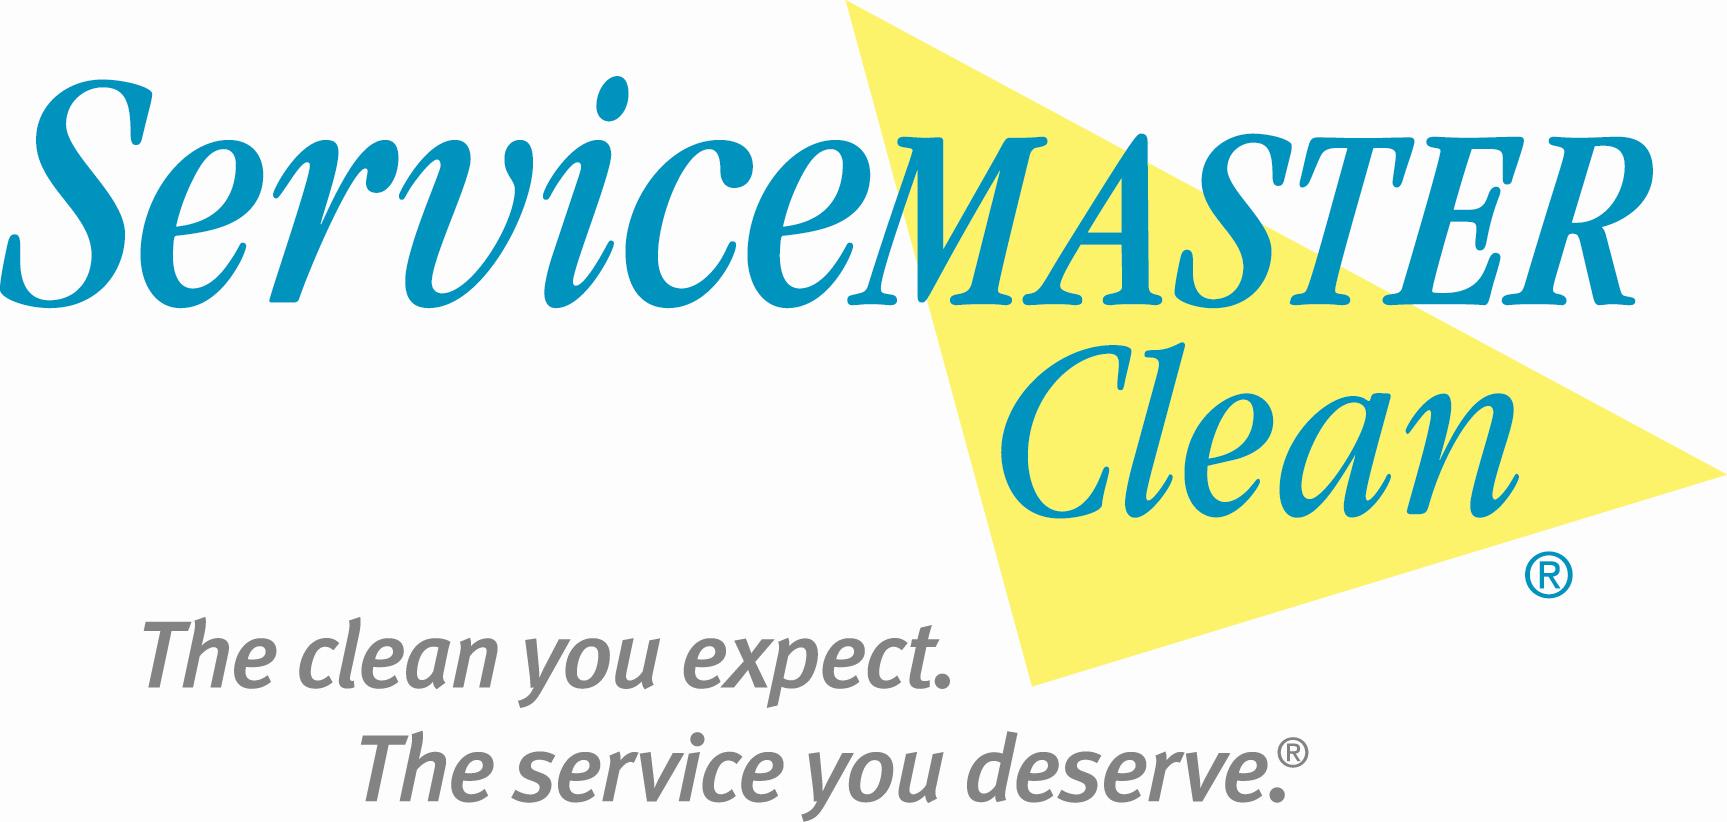 ServiceMaster Quality Cleaning Services Logo